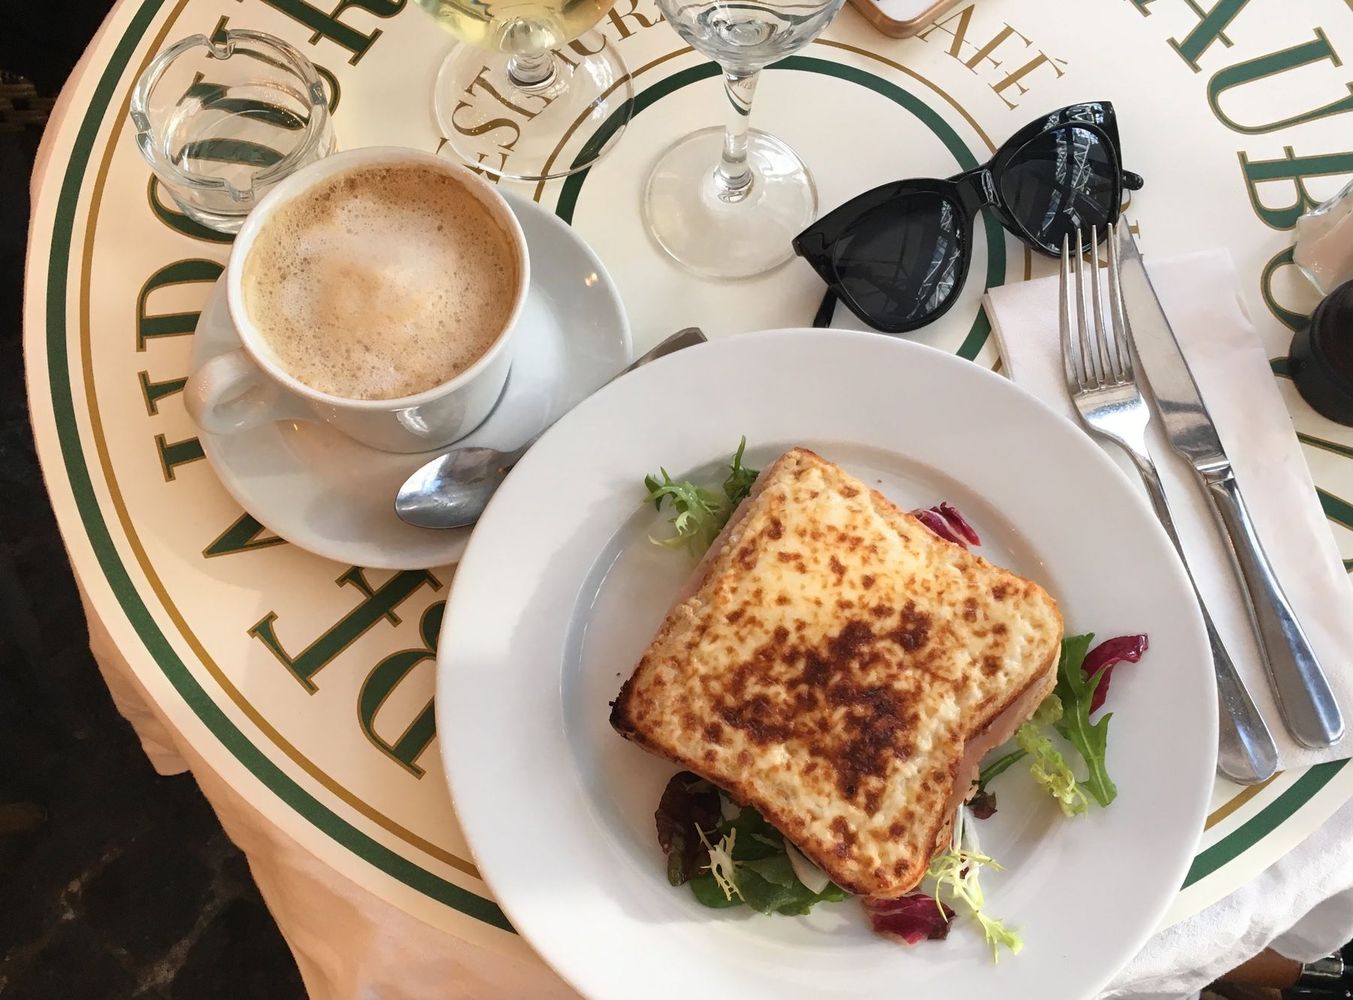 Where To Eat During Winter in Paris - Croque Monsieur